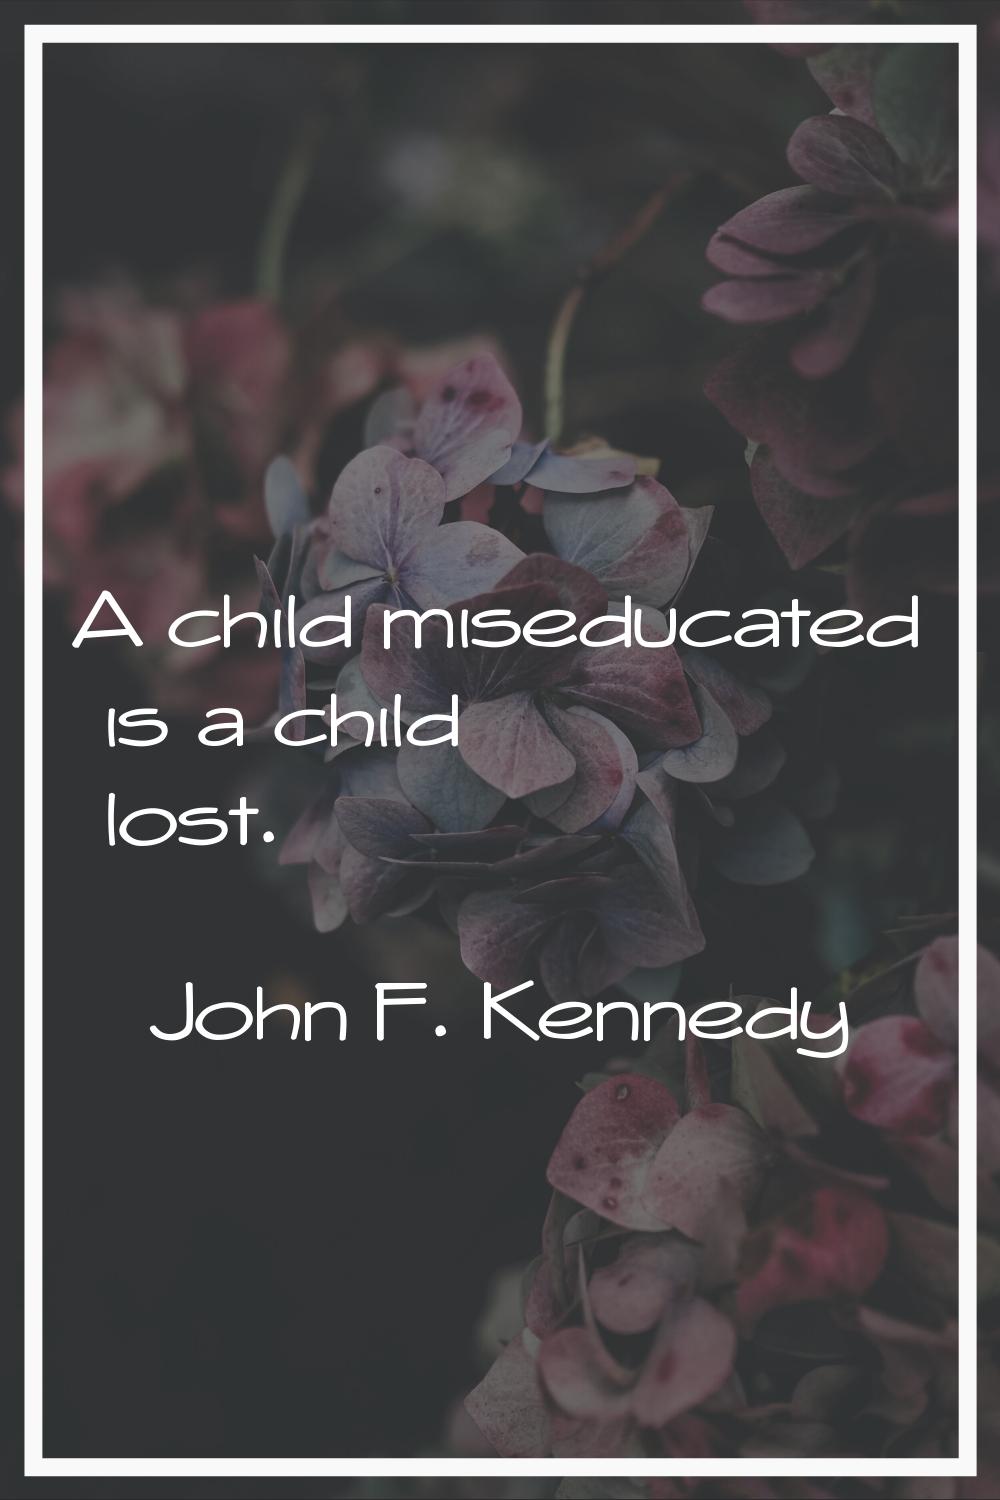 A child miseducated is a child lost.